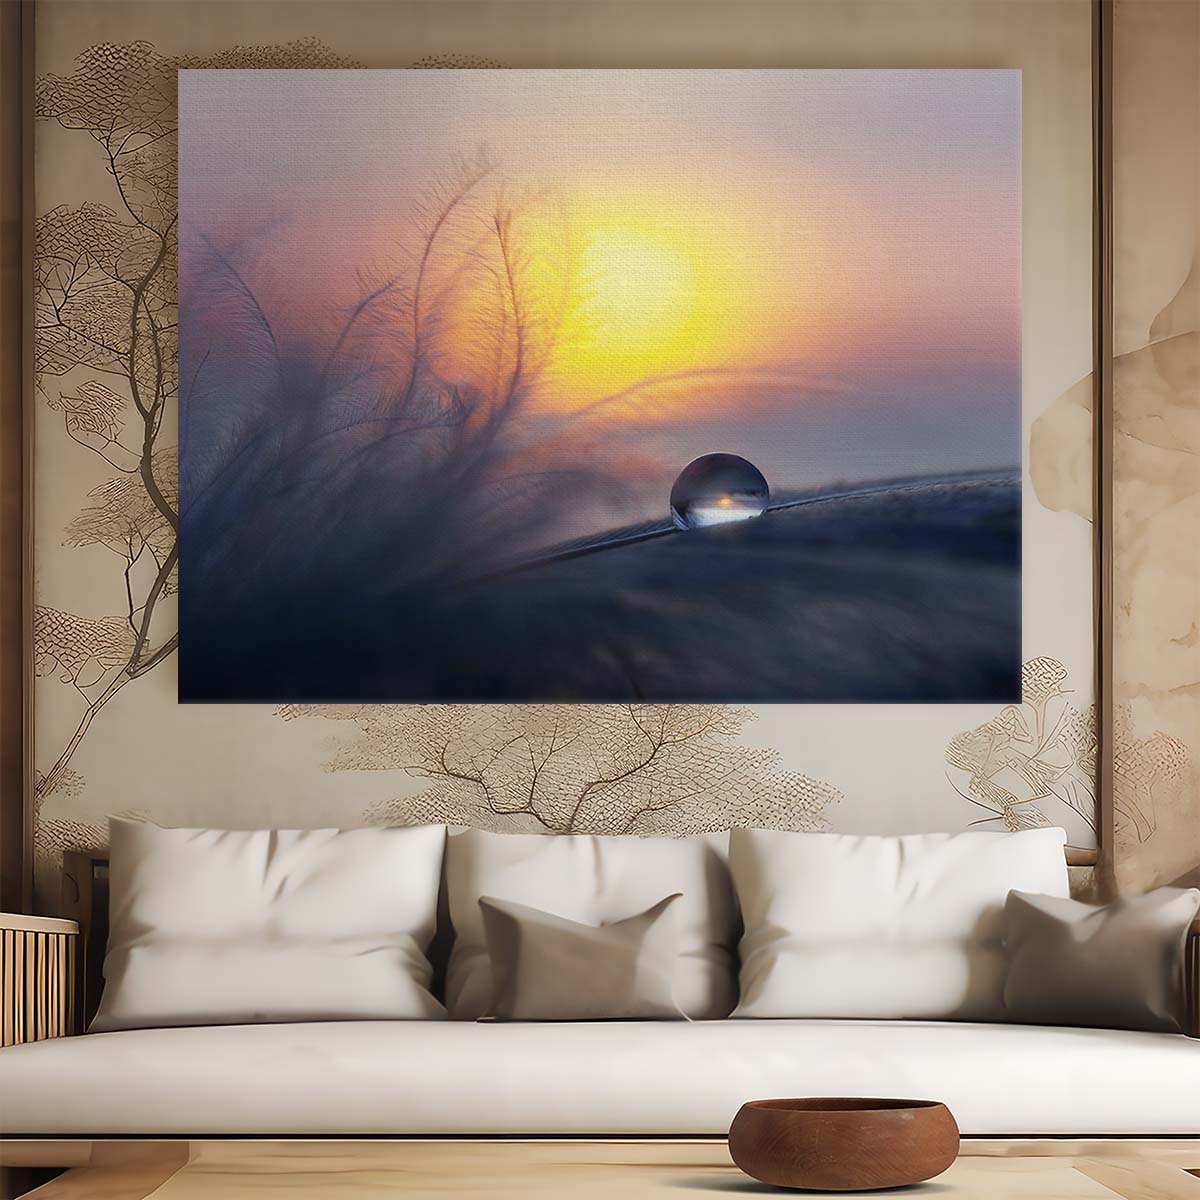 Delicate Dawn Feather & Dewdrop Sunrise Wall Art by Luxuriance Designs. Made in USA.